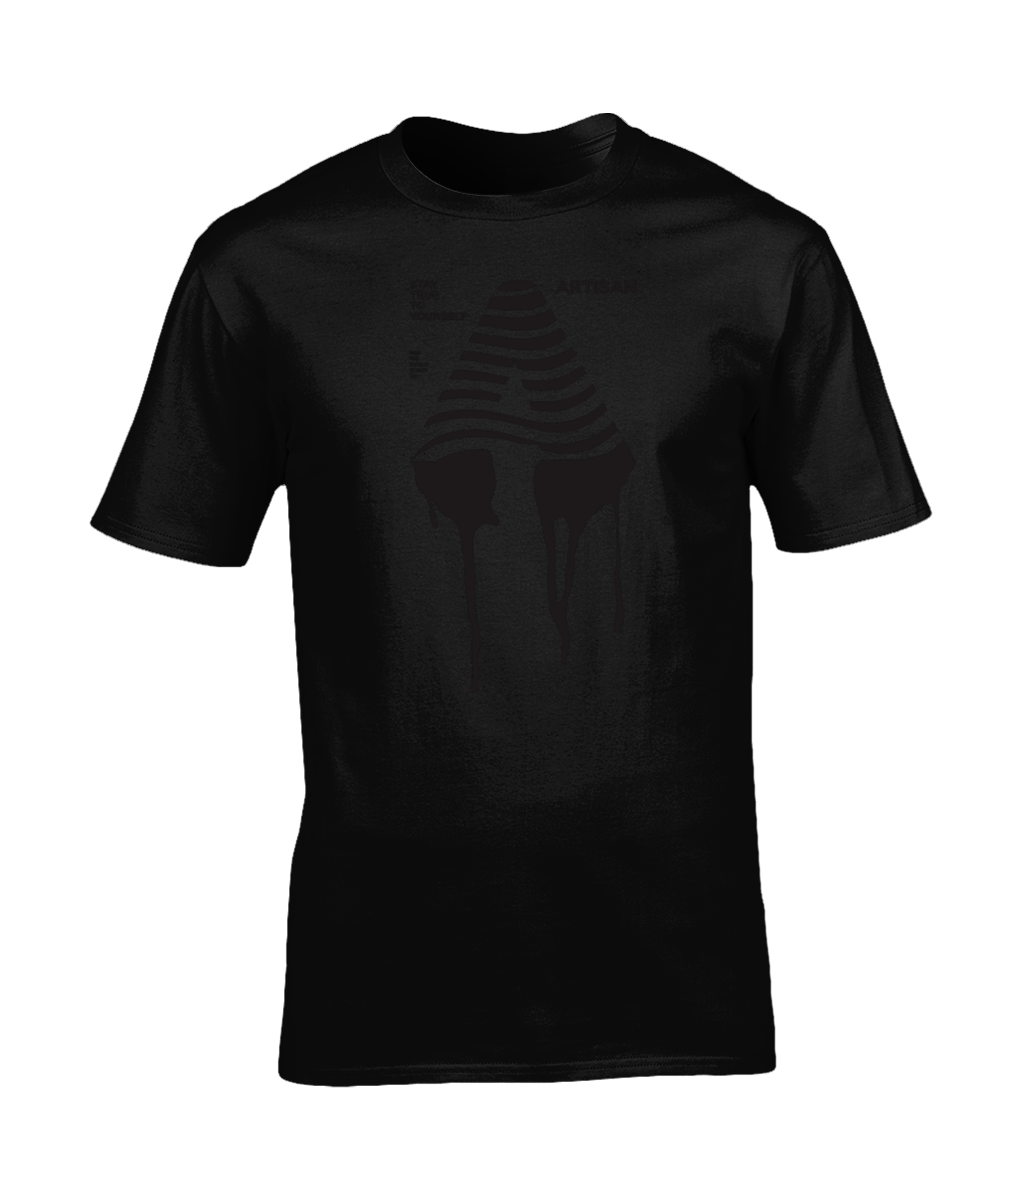 Dripped out Artist T-Shirt -Be Inspired